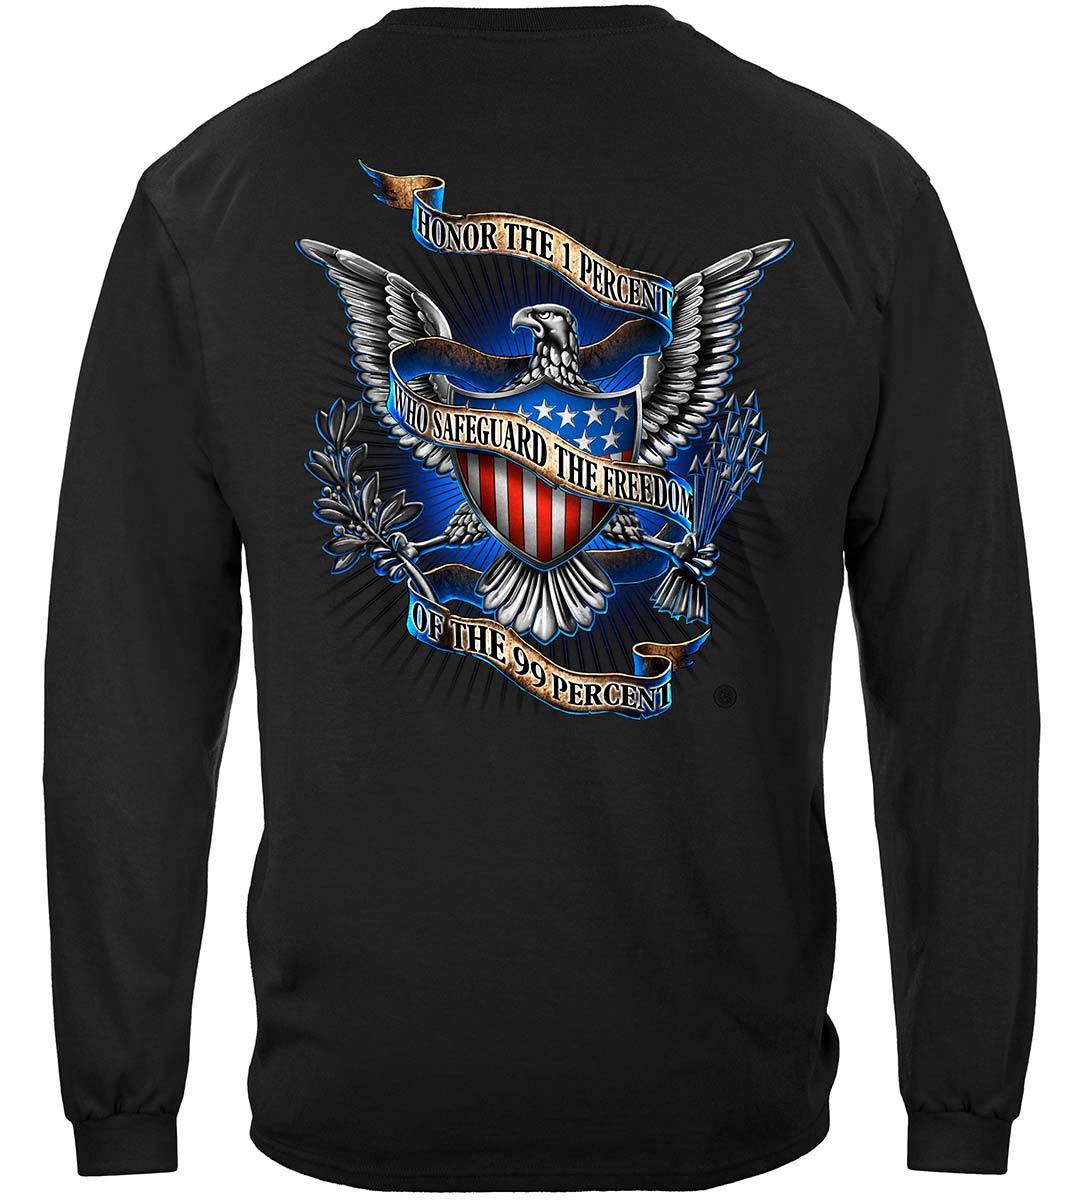 Honor The One Percent Premium Long Sleeves